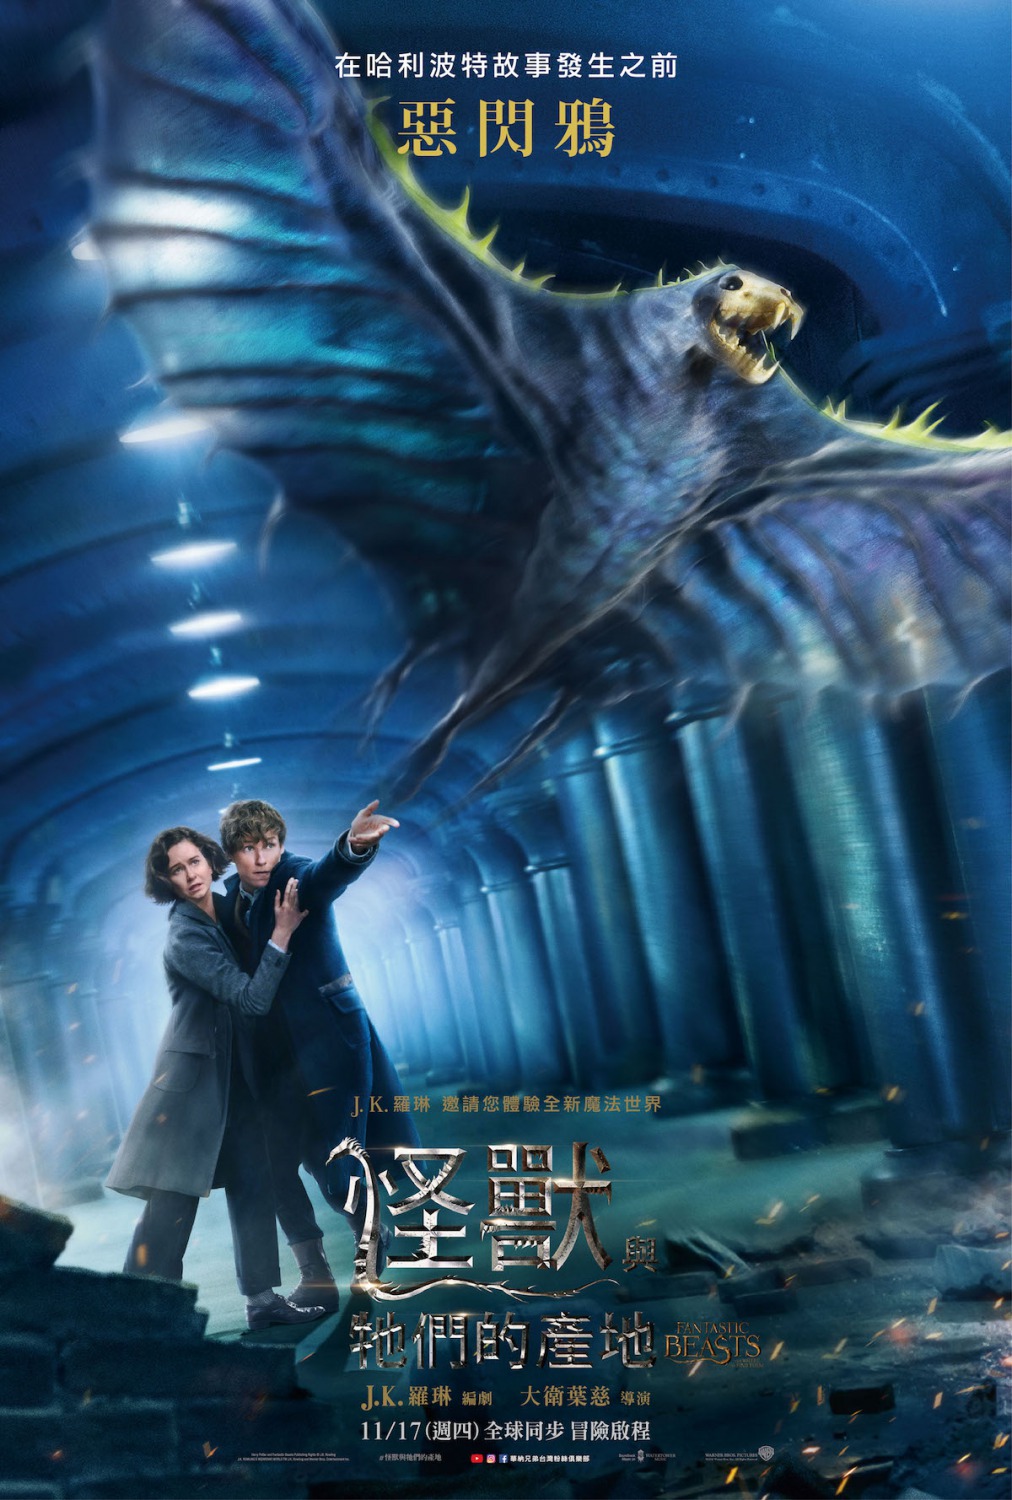 Extra Large Movie Poster Image for Fantastic Beasts and Where to Find Them (#21 of 23)